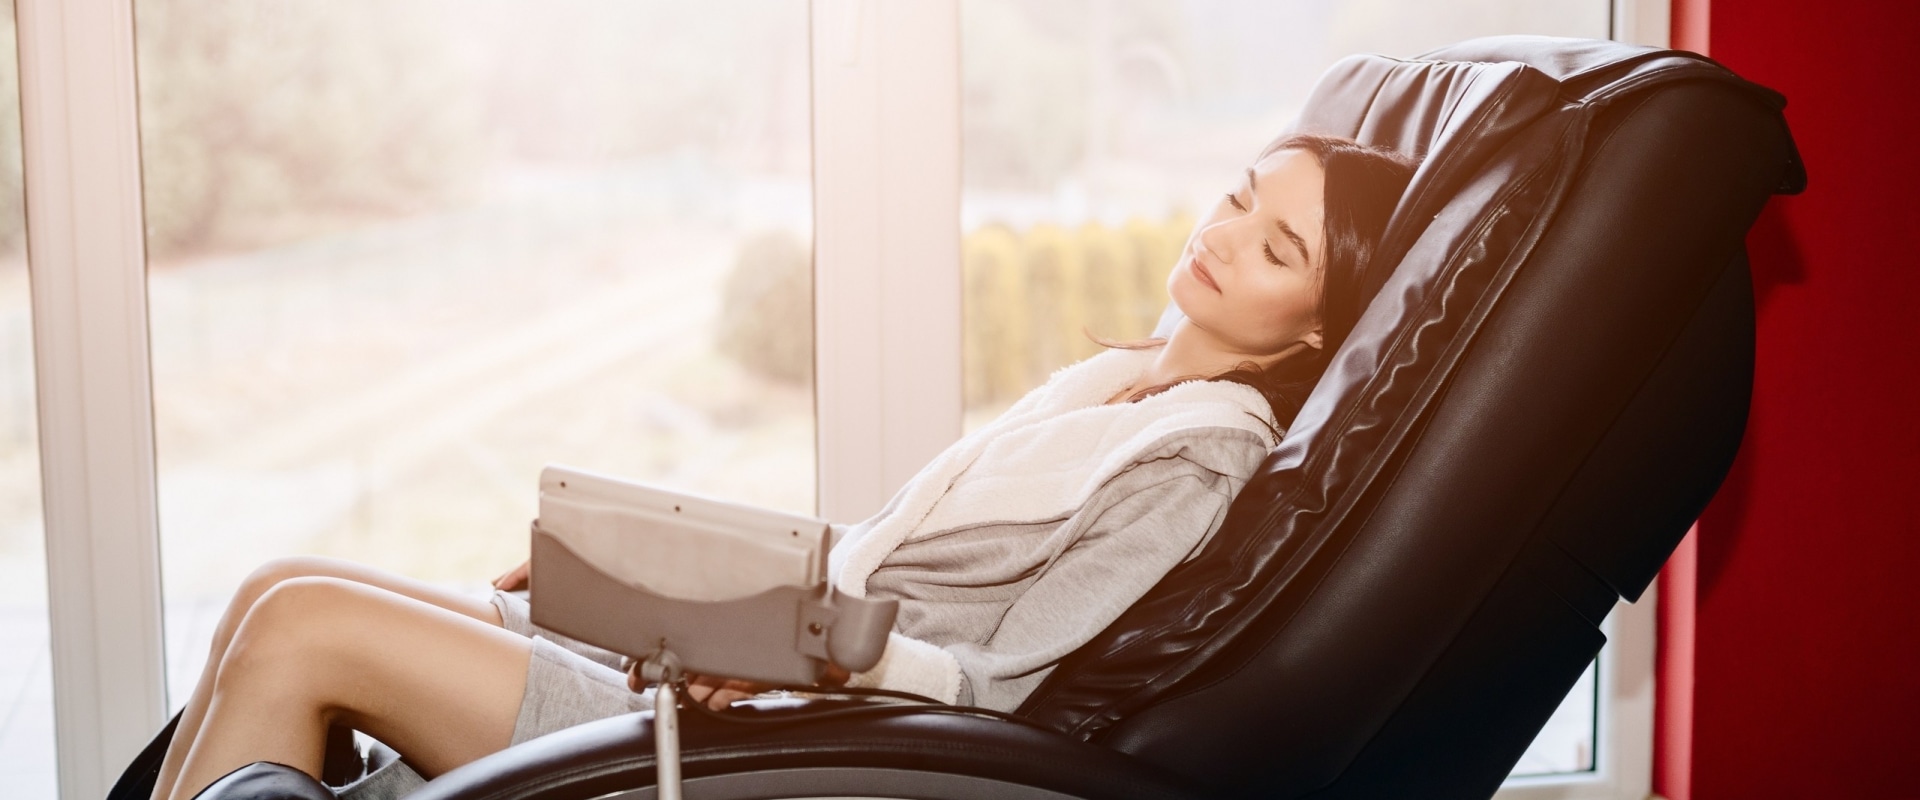 The Benefits of Using a Massage Chair for Health and Well-Being